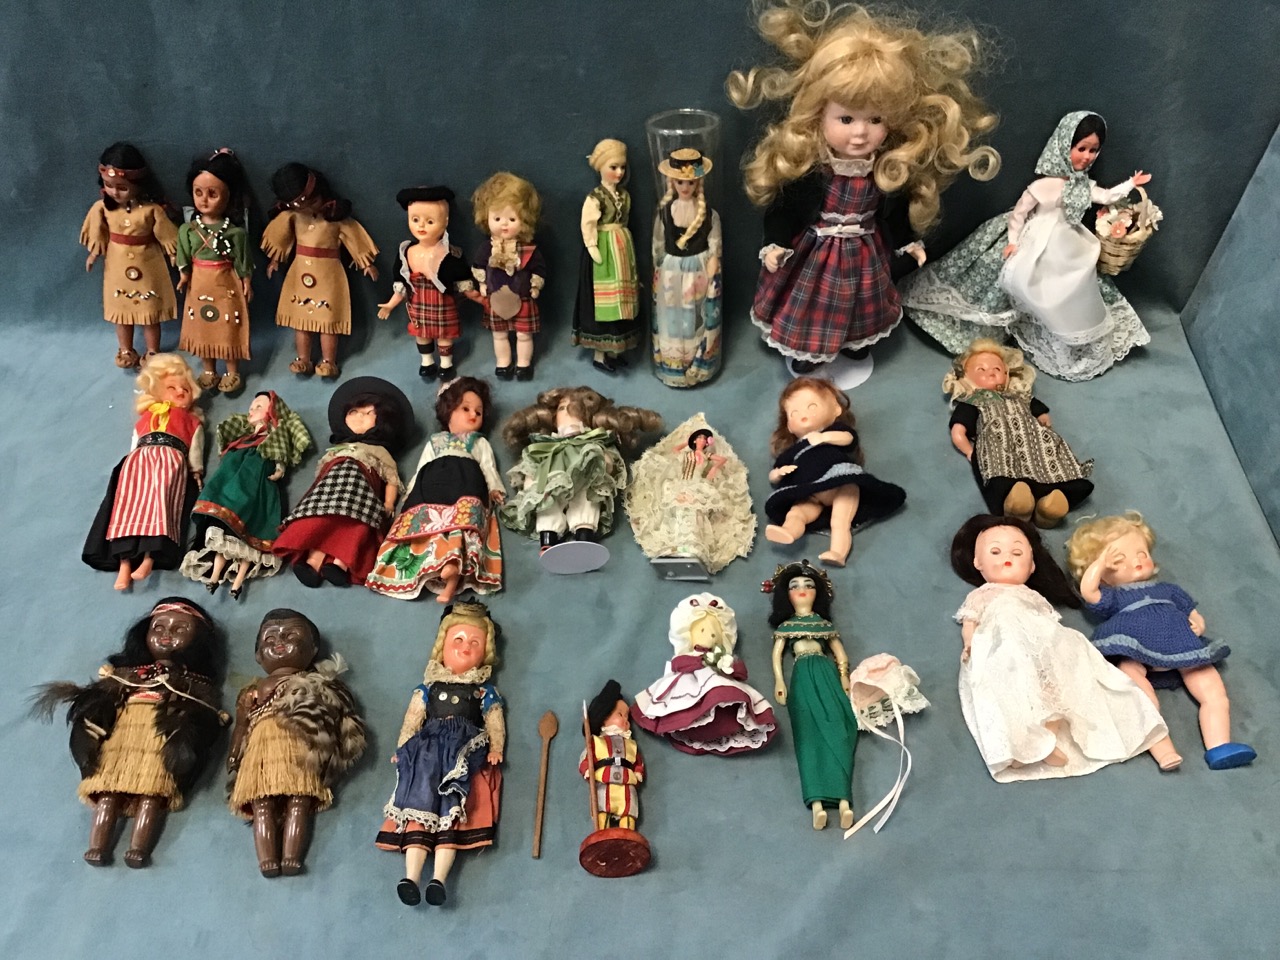 A collection of dolls, mainly in national costumes - Dutch, Welsh, Scottish, a Swiss guard, Māori,